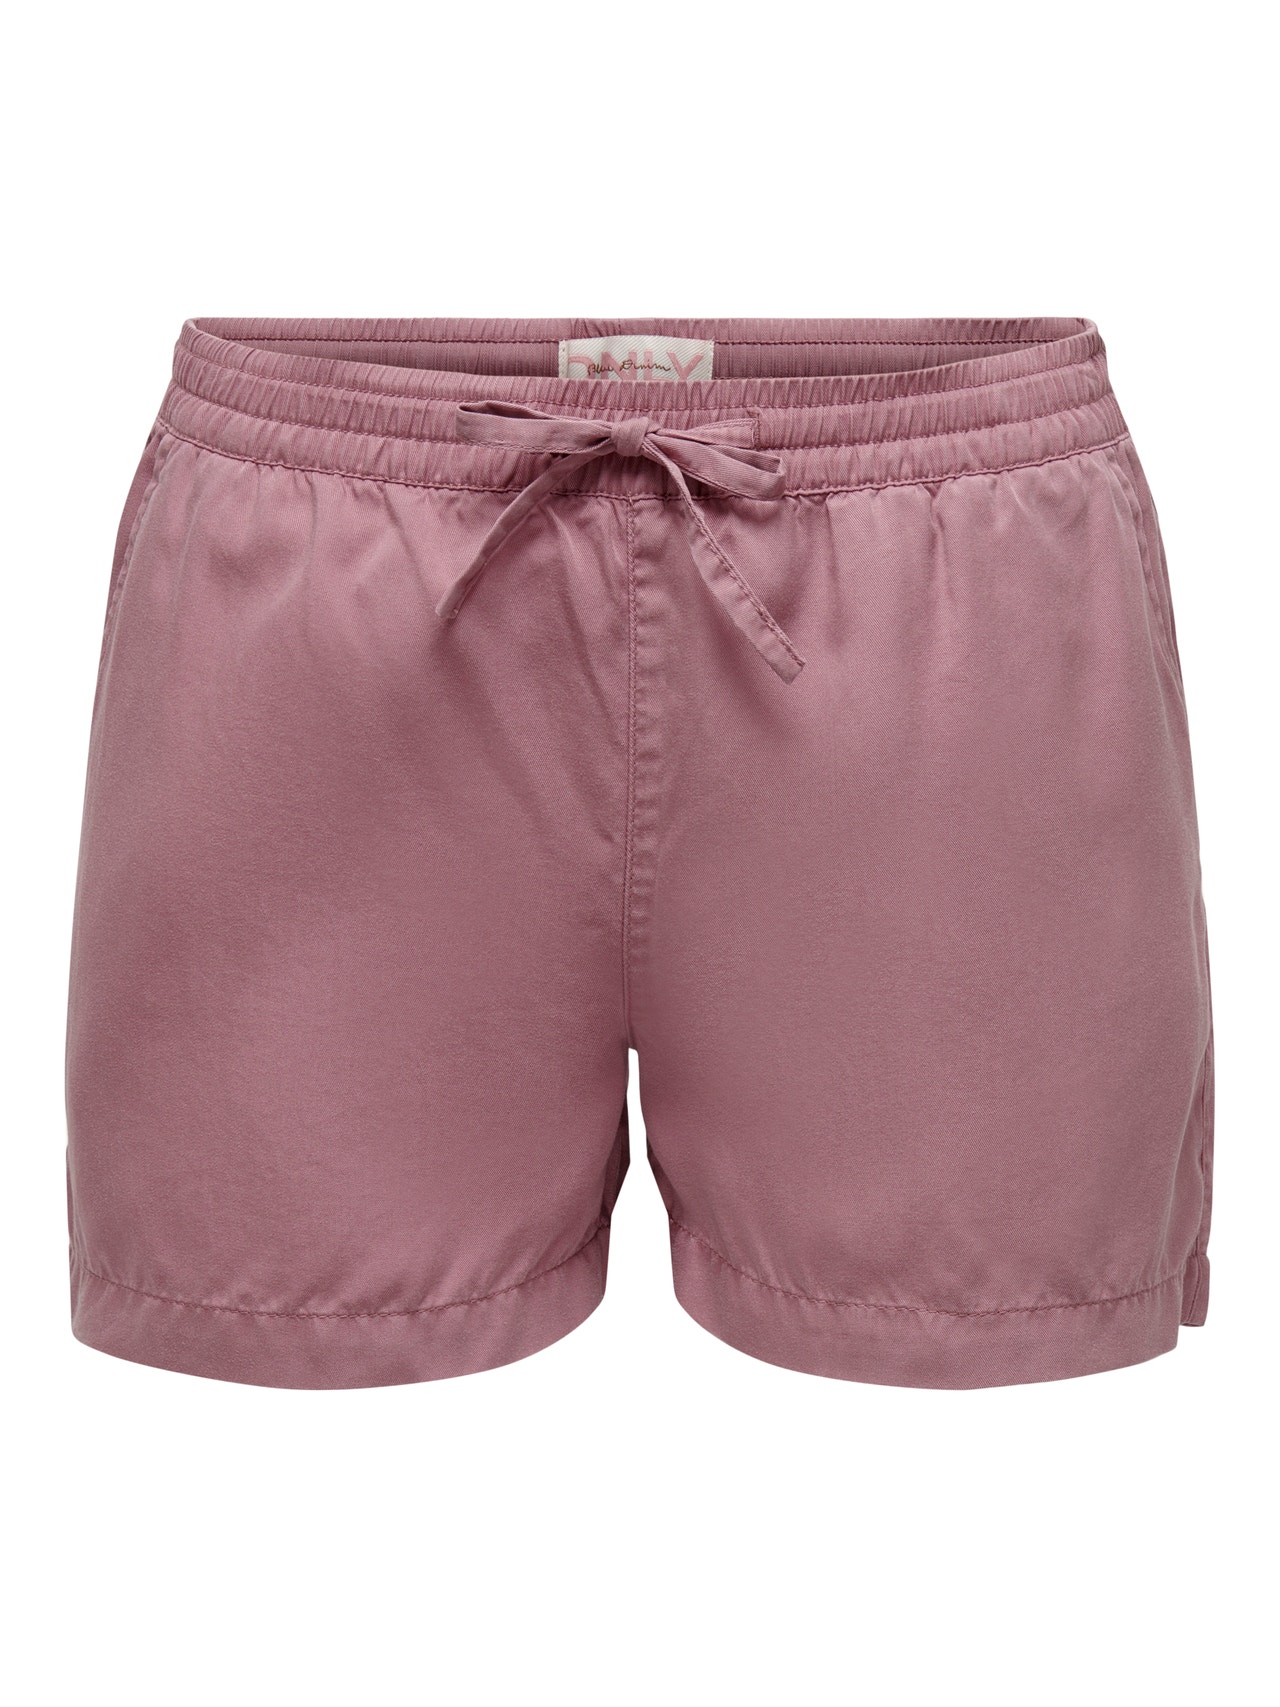 ONLY Loose Fit Mid waist Shorts -Nostalgia Rose - 15295603